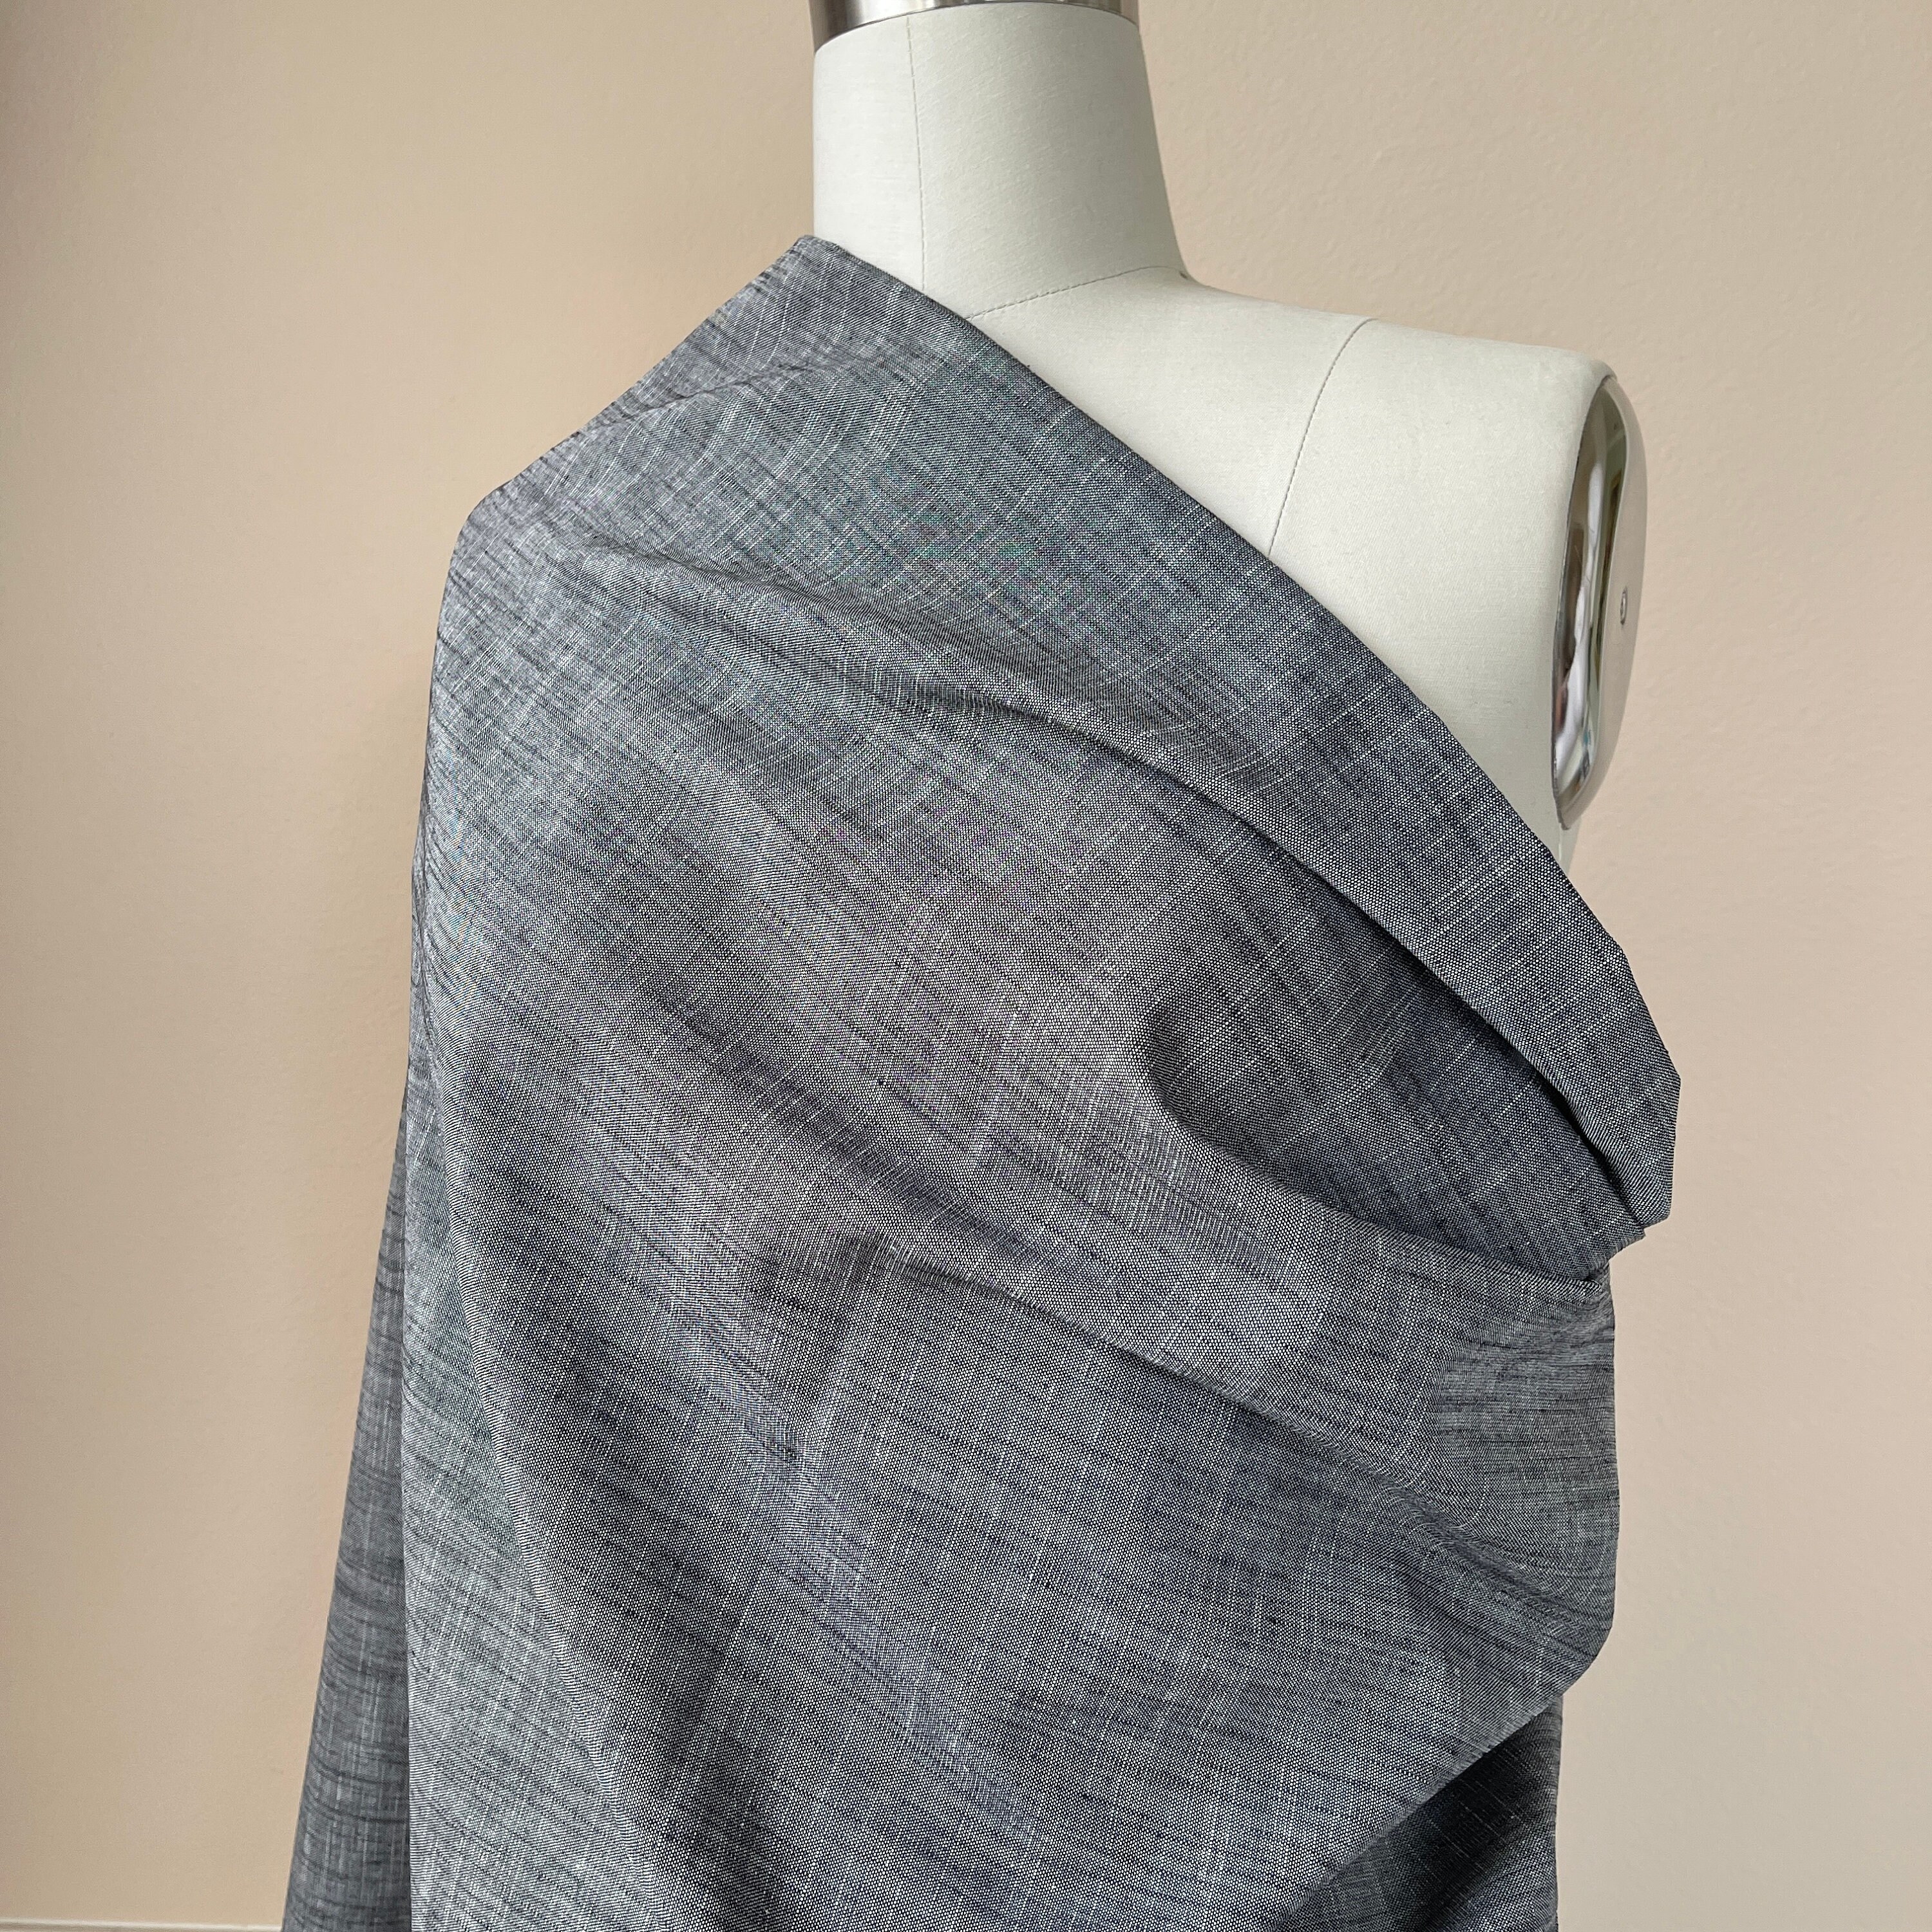 Cotton Chambray Fabric By The Yard Sewing Shirting Shirt Top Dress Yarn Non  Stretch Dyed Plain Weave Denim Look Fabric- Dark Sage Green CN8